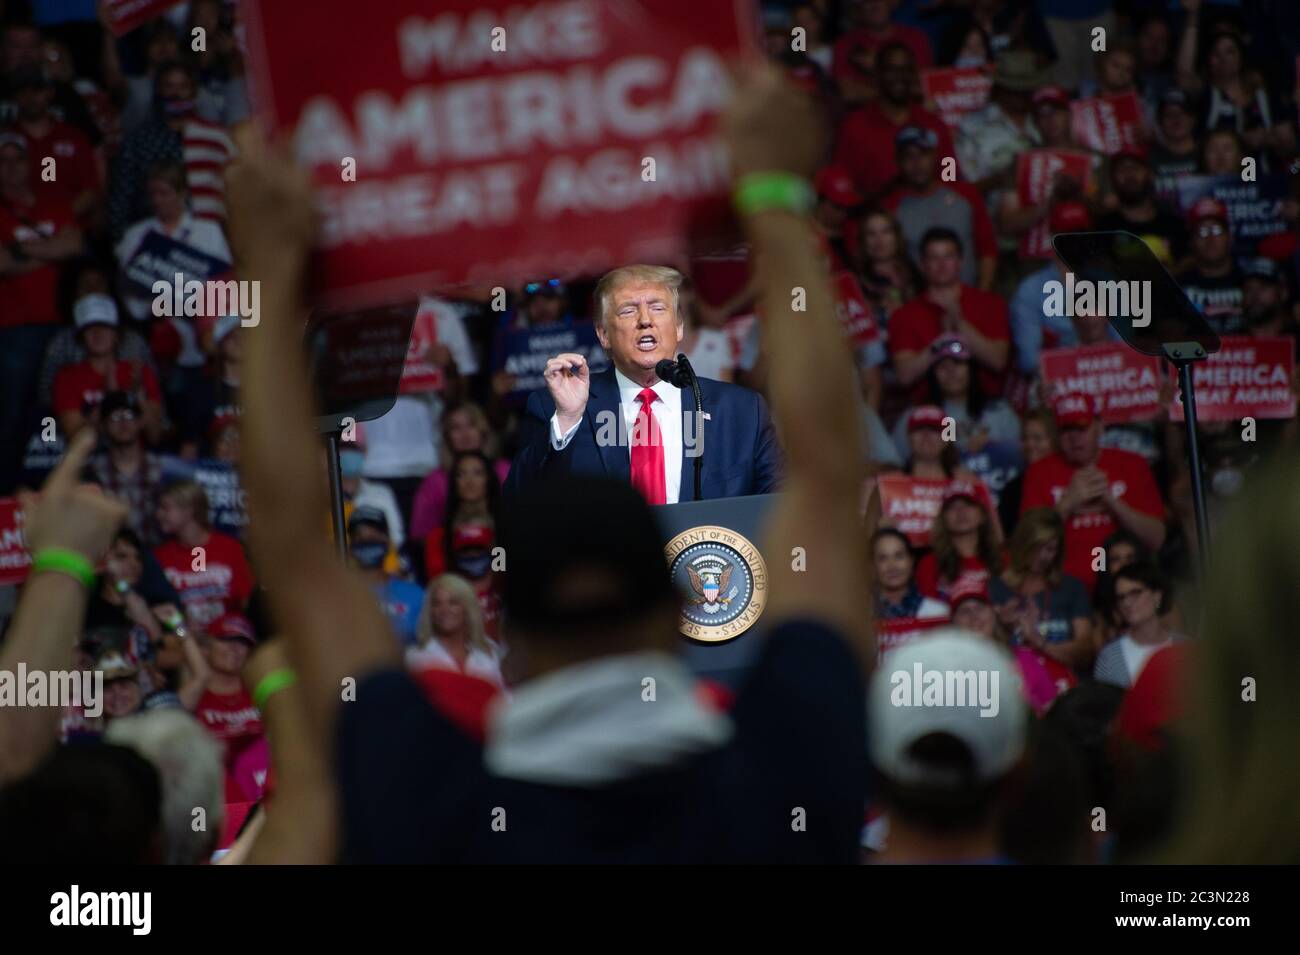 Tulsa, Oklahoma, USA. 20th June, 2020. TULSA, Oklahoma, USA.  - June 20, 2020: US President Donald J. Trump holds campaign rally in Bank of Oklahoma Center. The campaign rally is the first since March 2020 when most of the country locked down due to Covid-19.TULSA, Oklahoma, USA.  - June 20, 2020: US President Donald J. Trump holds campaign rally in Bank of Oklahoma Center. The campaign rally is the first since March 2020 when most of the country locked down due to Covid-19.TULSA, Oklahoma, USA.  - June 20, 2020: US President Donald J. Trump holds campaign rally in Bank of Oklahoma Center. The Stock Photo